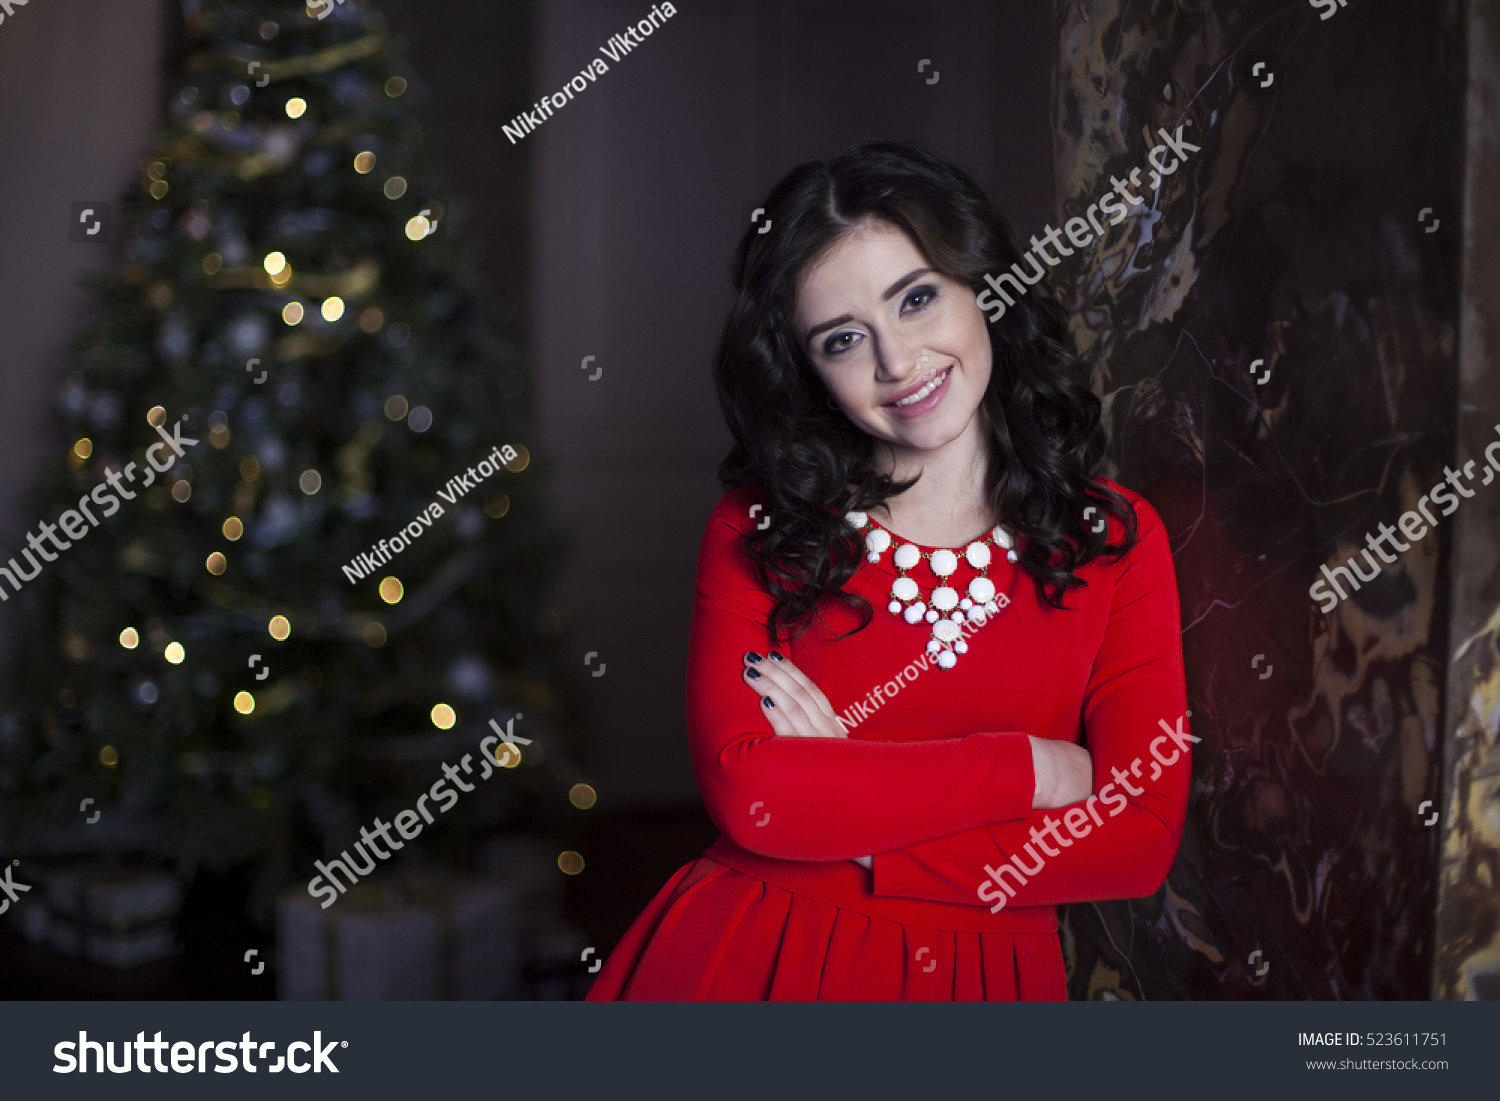 Cute girl in red dress with Christmas tree #523611751